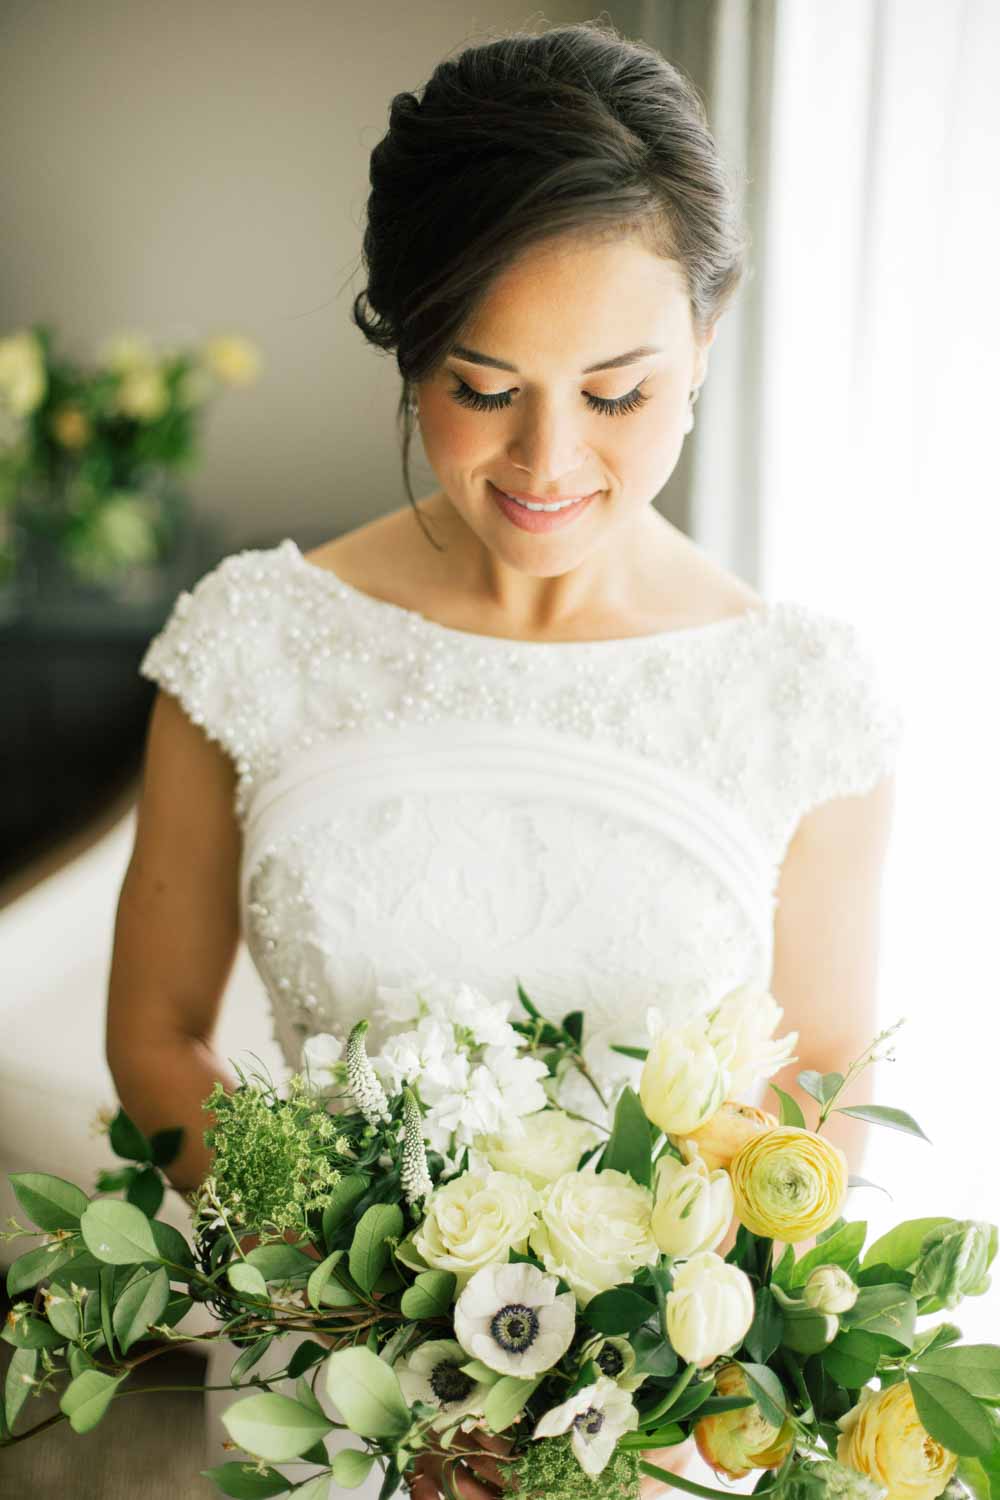 Anastasiia Photography | Bride with wedding bouquet made with white roses, white anemonies, white flowers